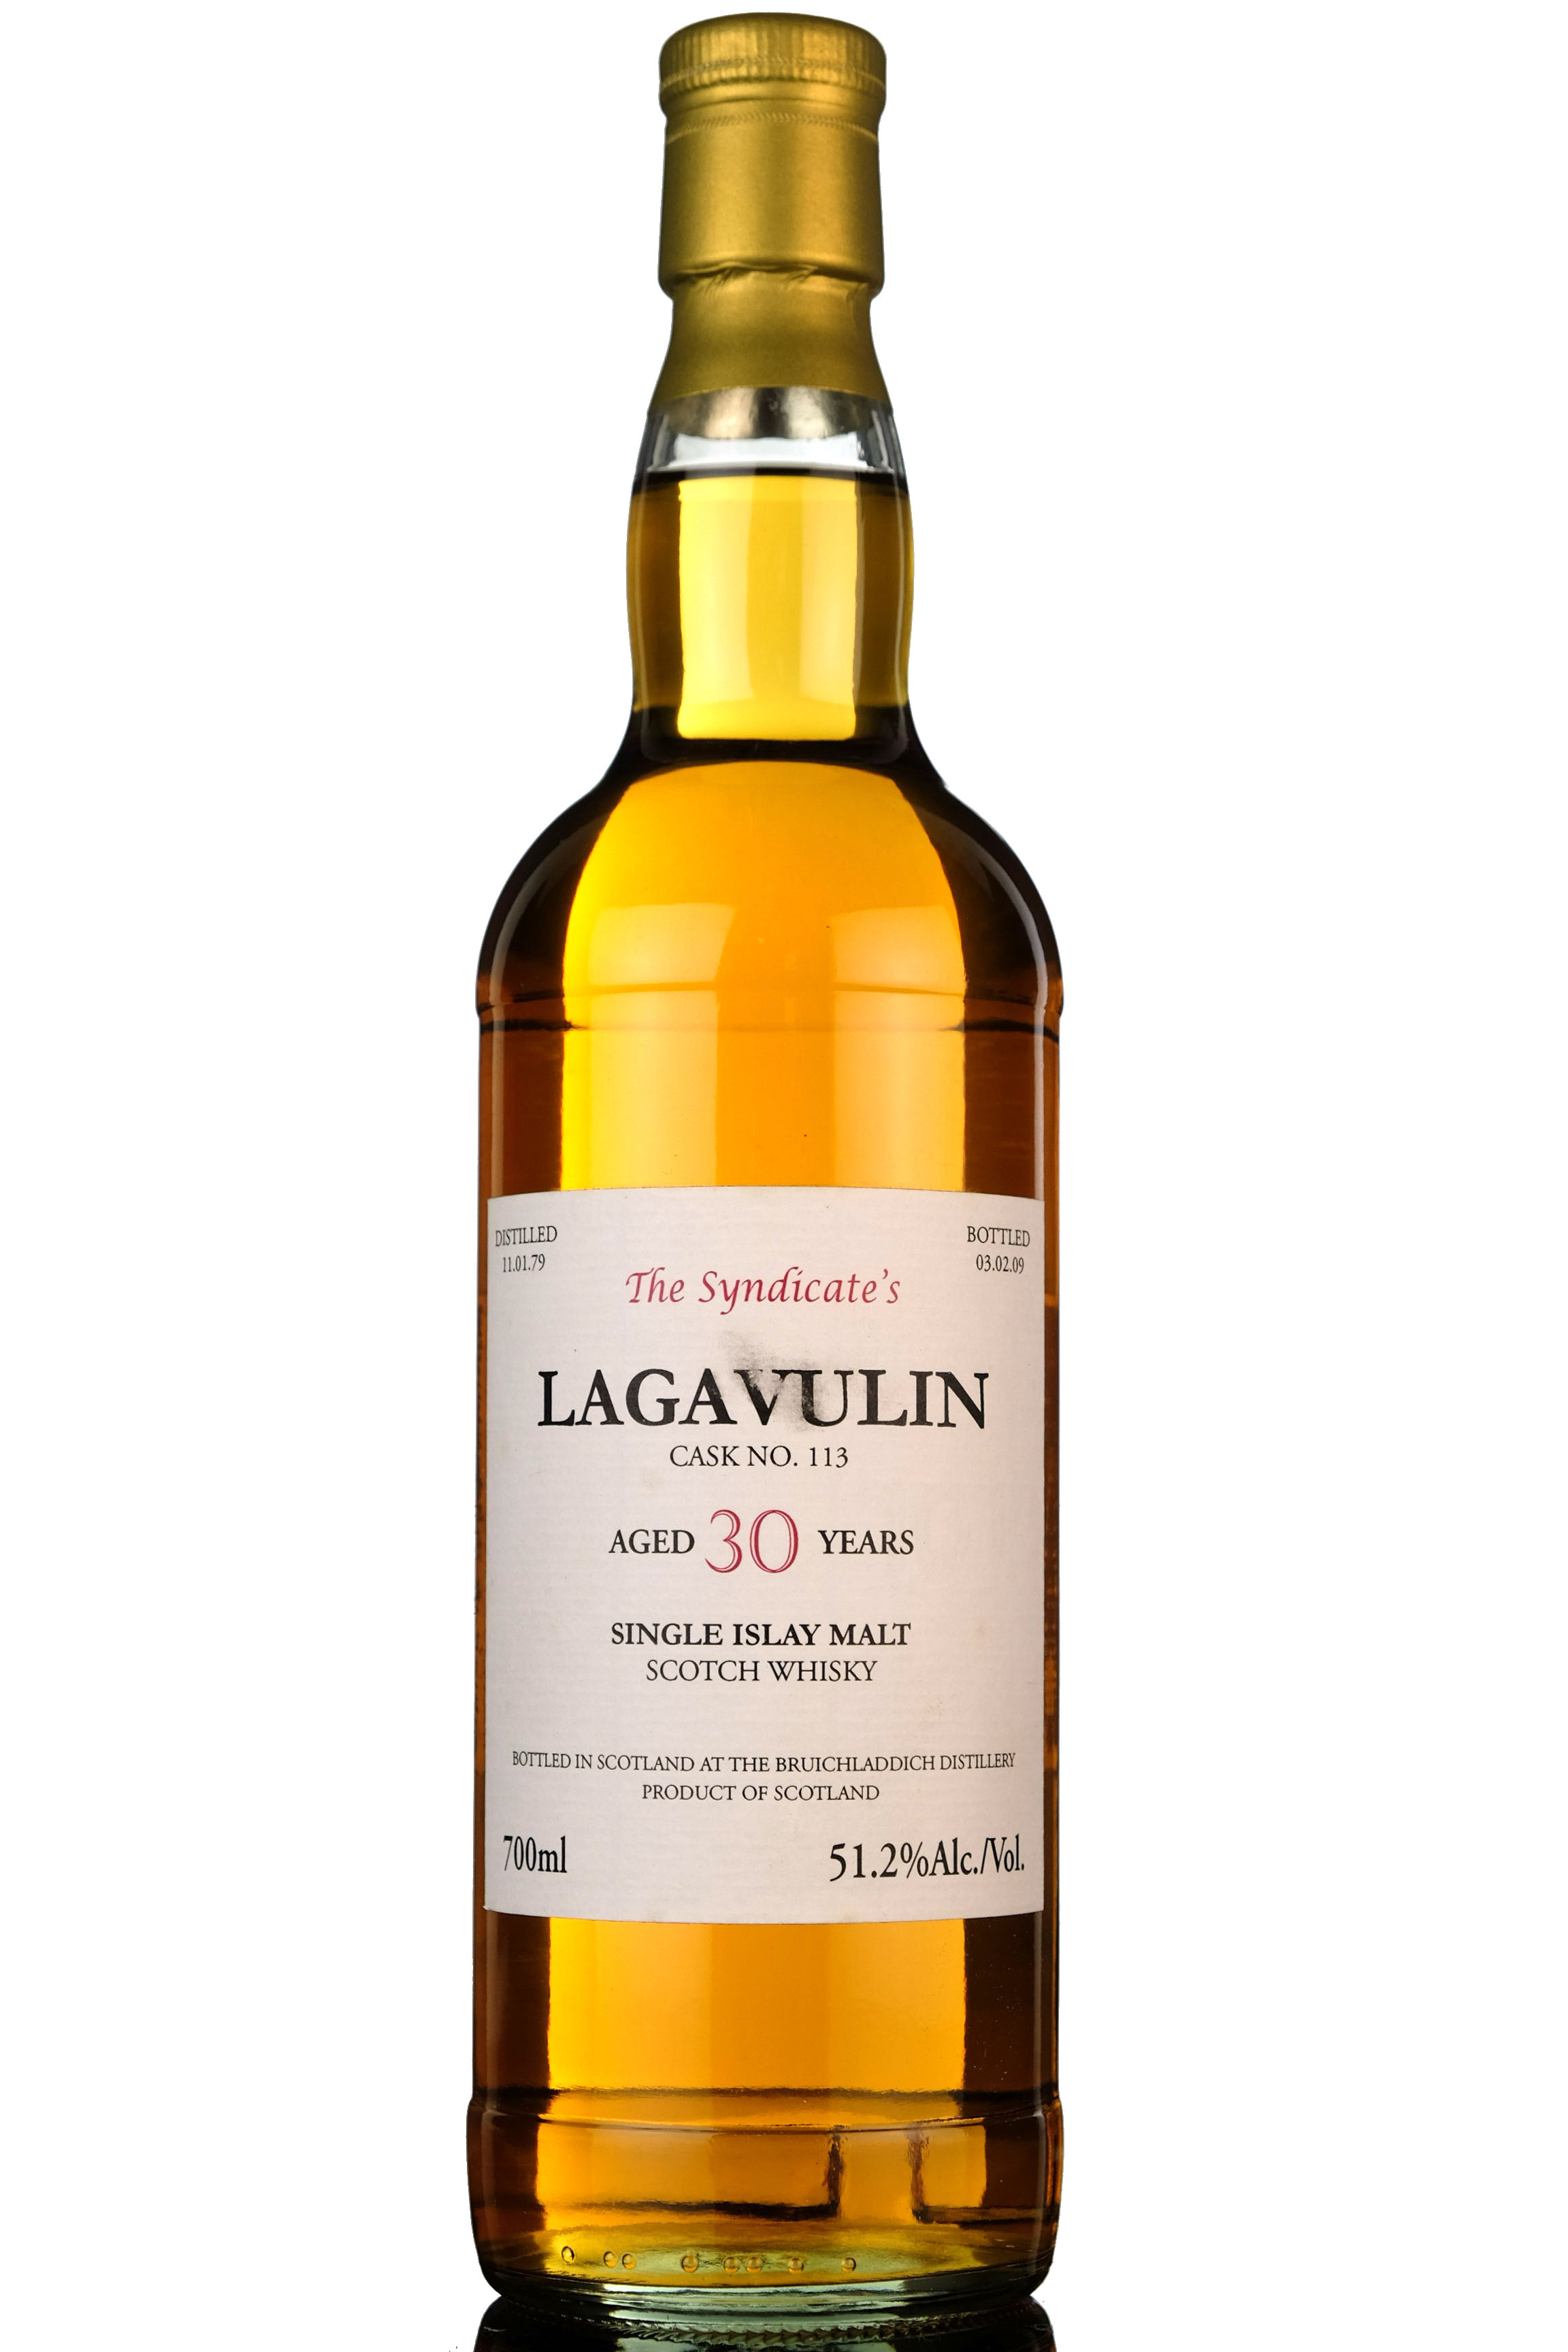 Lagavulin 1979-2009 - 30 Year Old - The Syndicate